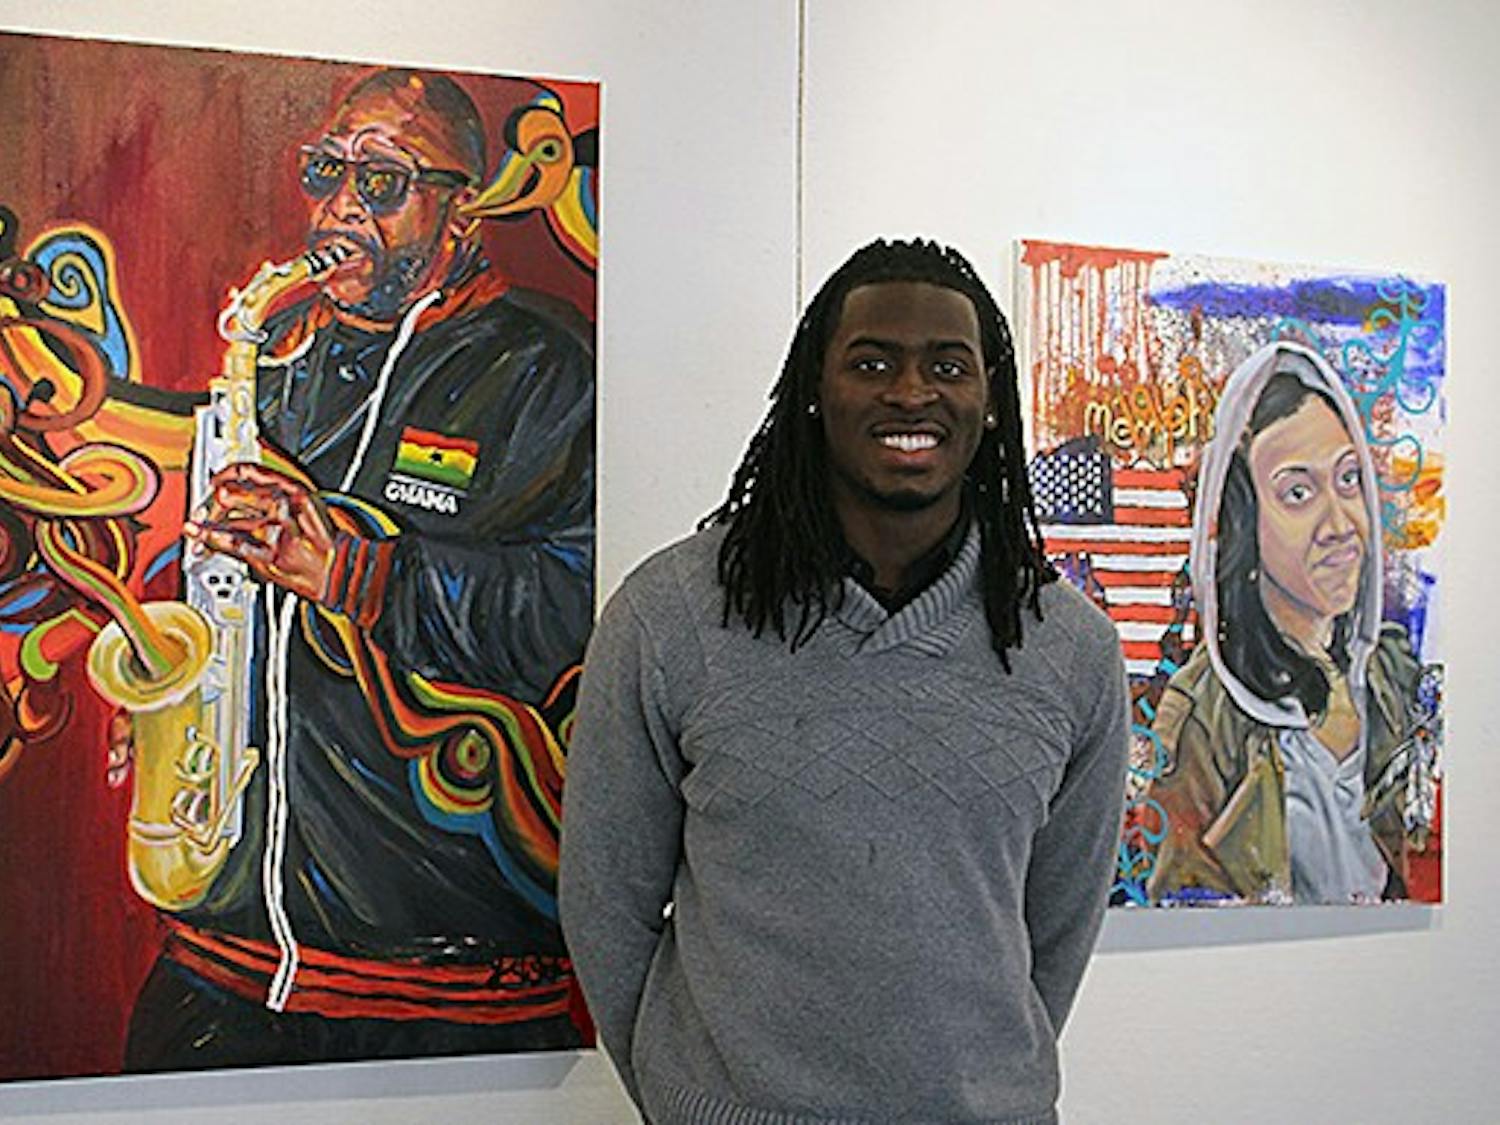 Lamar Whidbee, a graduate of NC Central University and originally from Elizabeth City, currently has art on display in the Union Gallery exhibit 'Black Like Me' along with other community artists, including UNC artist Will Thomas. 